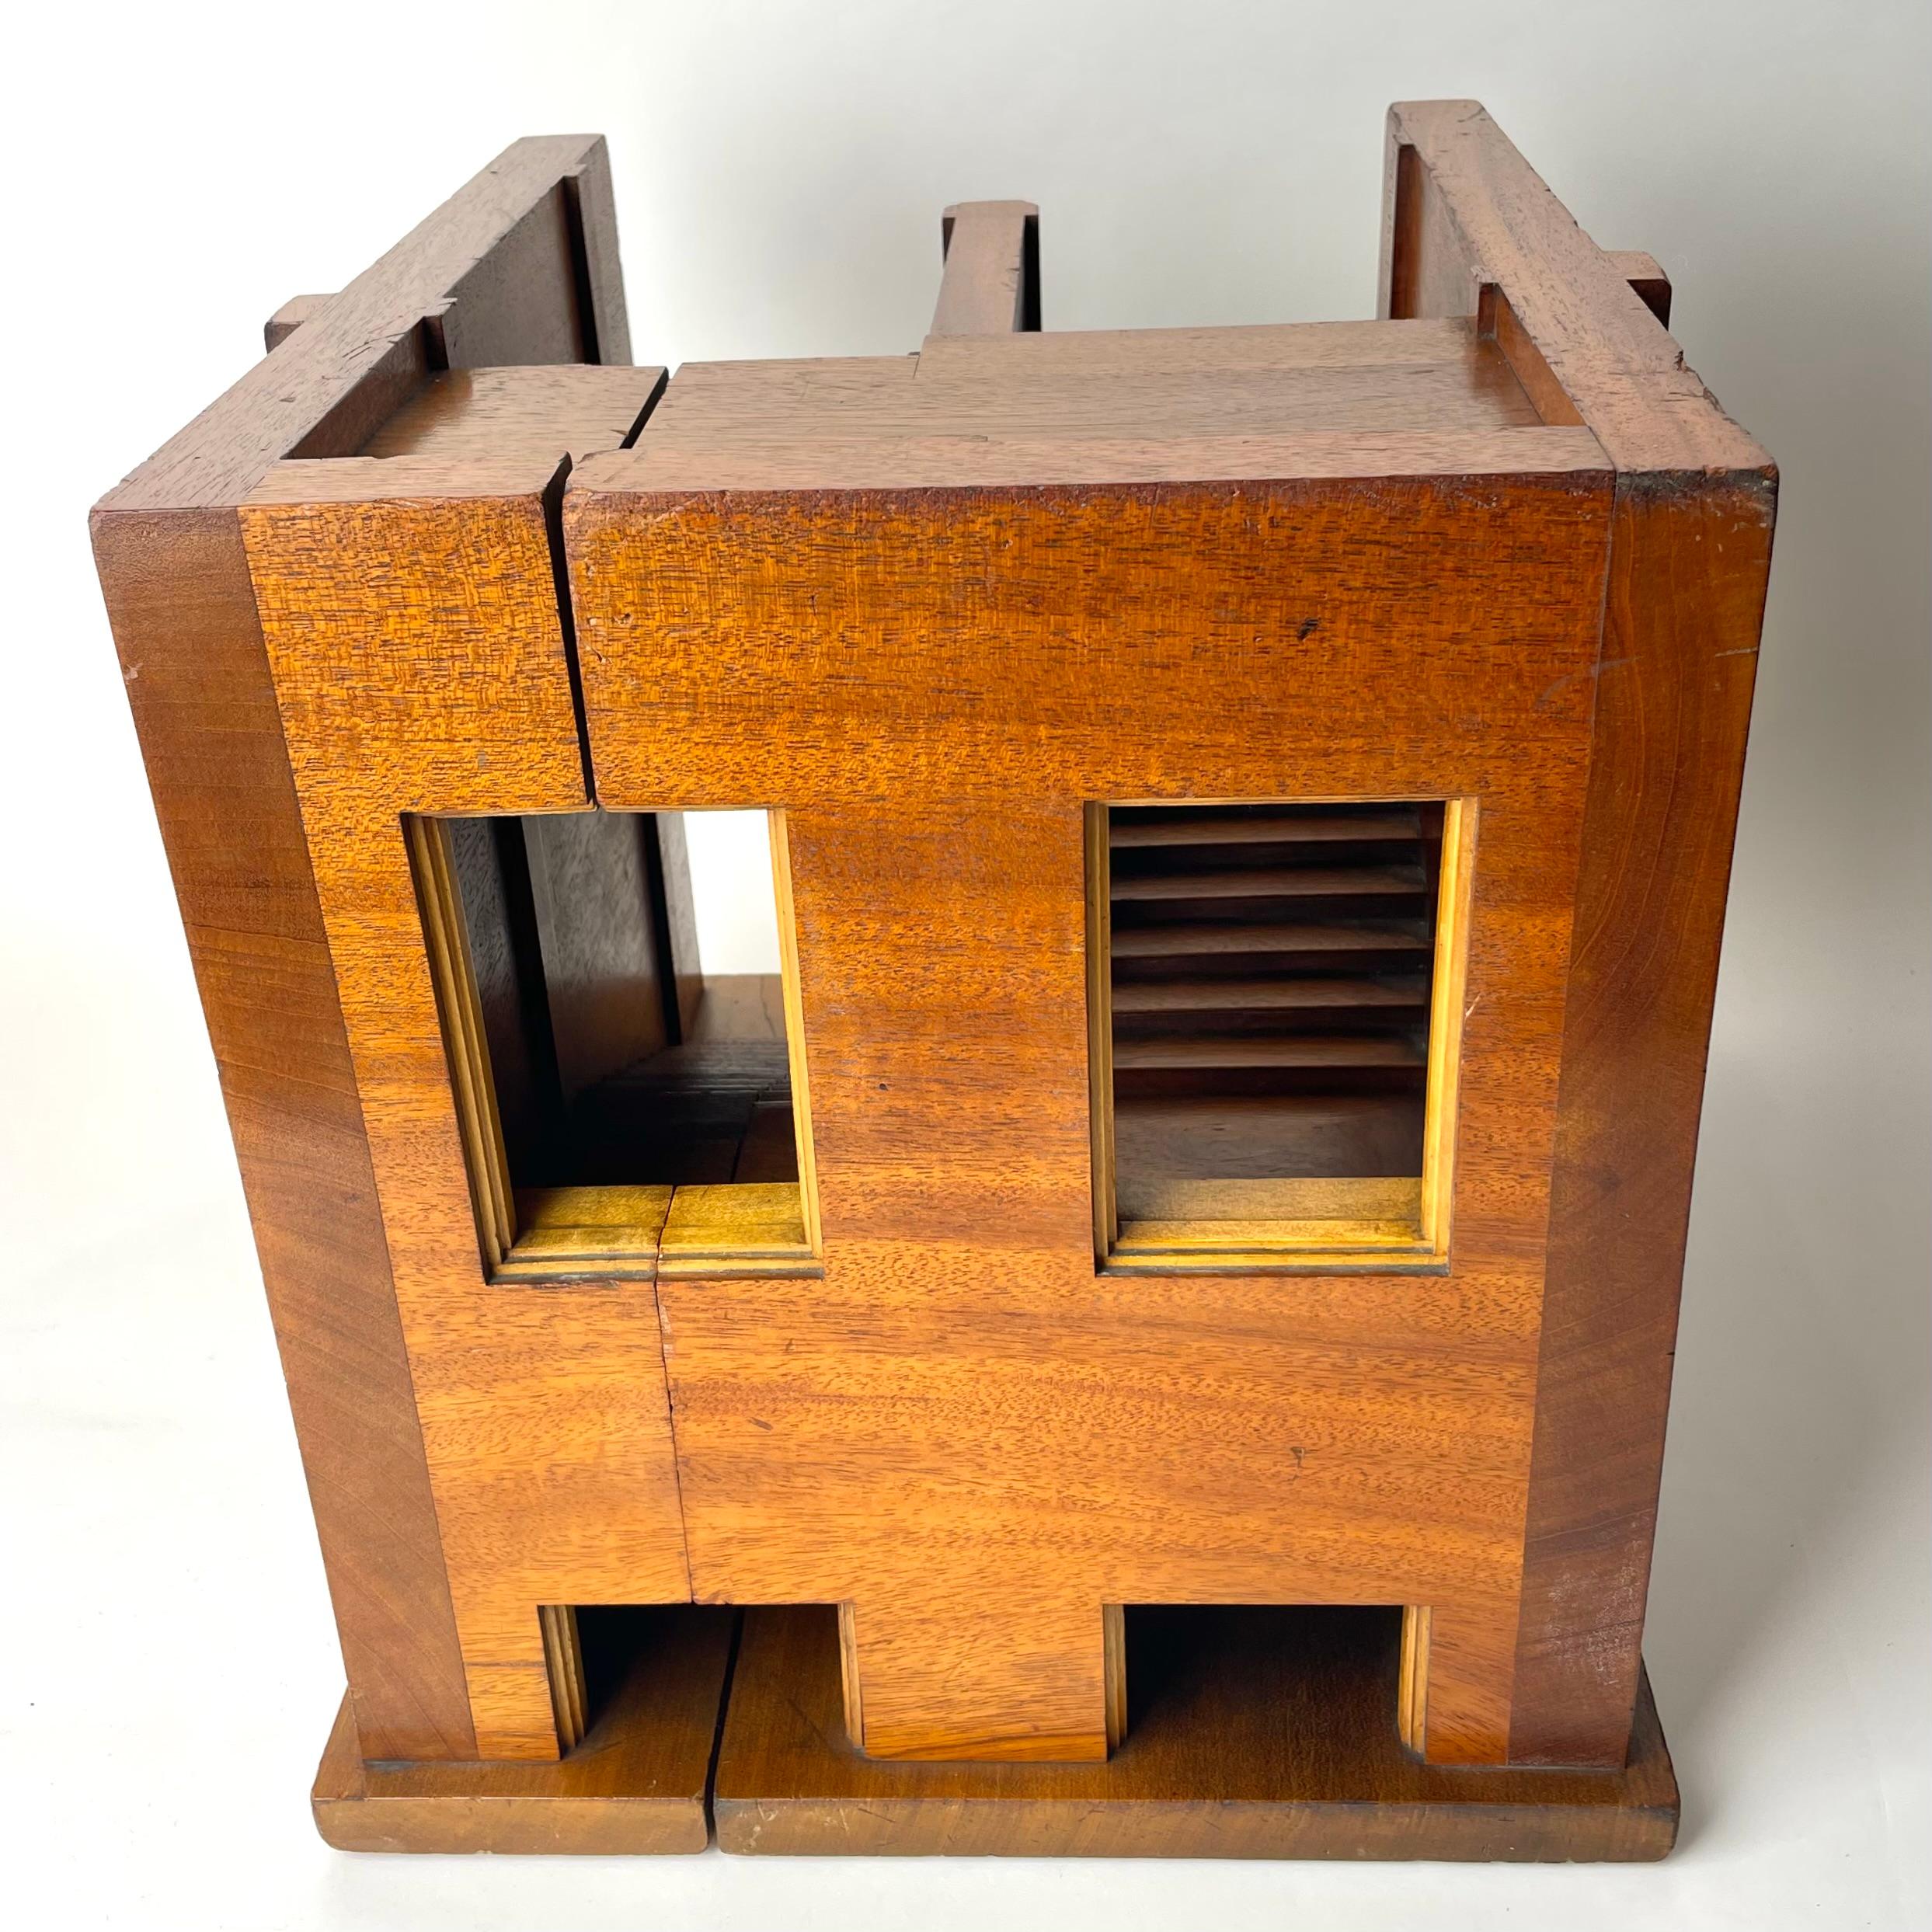 Mahogany Staircase Section Architectural Model, Late 19th/Early 20th C England. For Sale 11